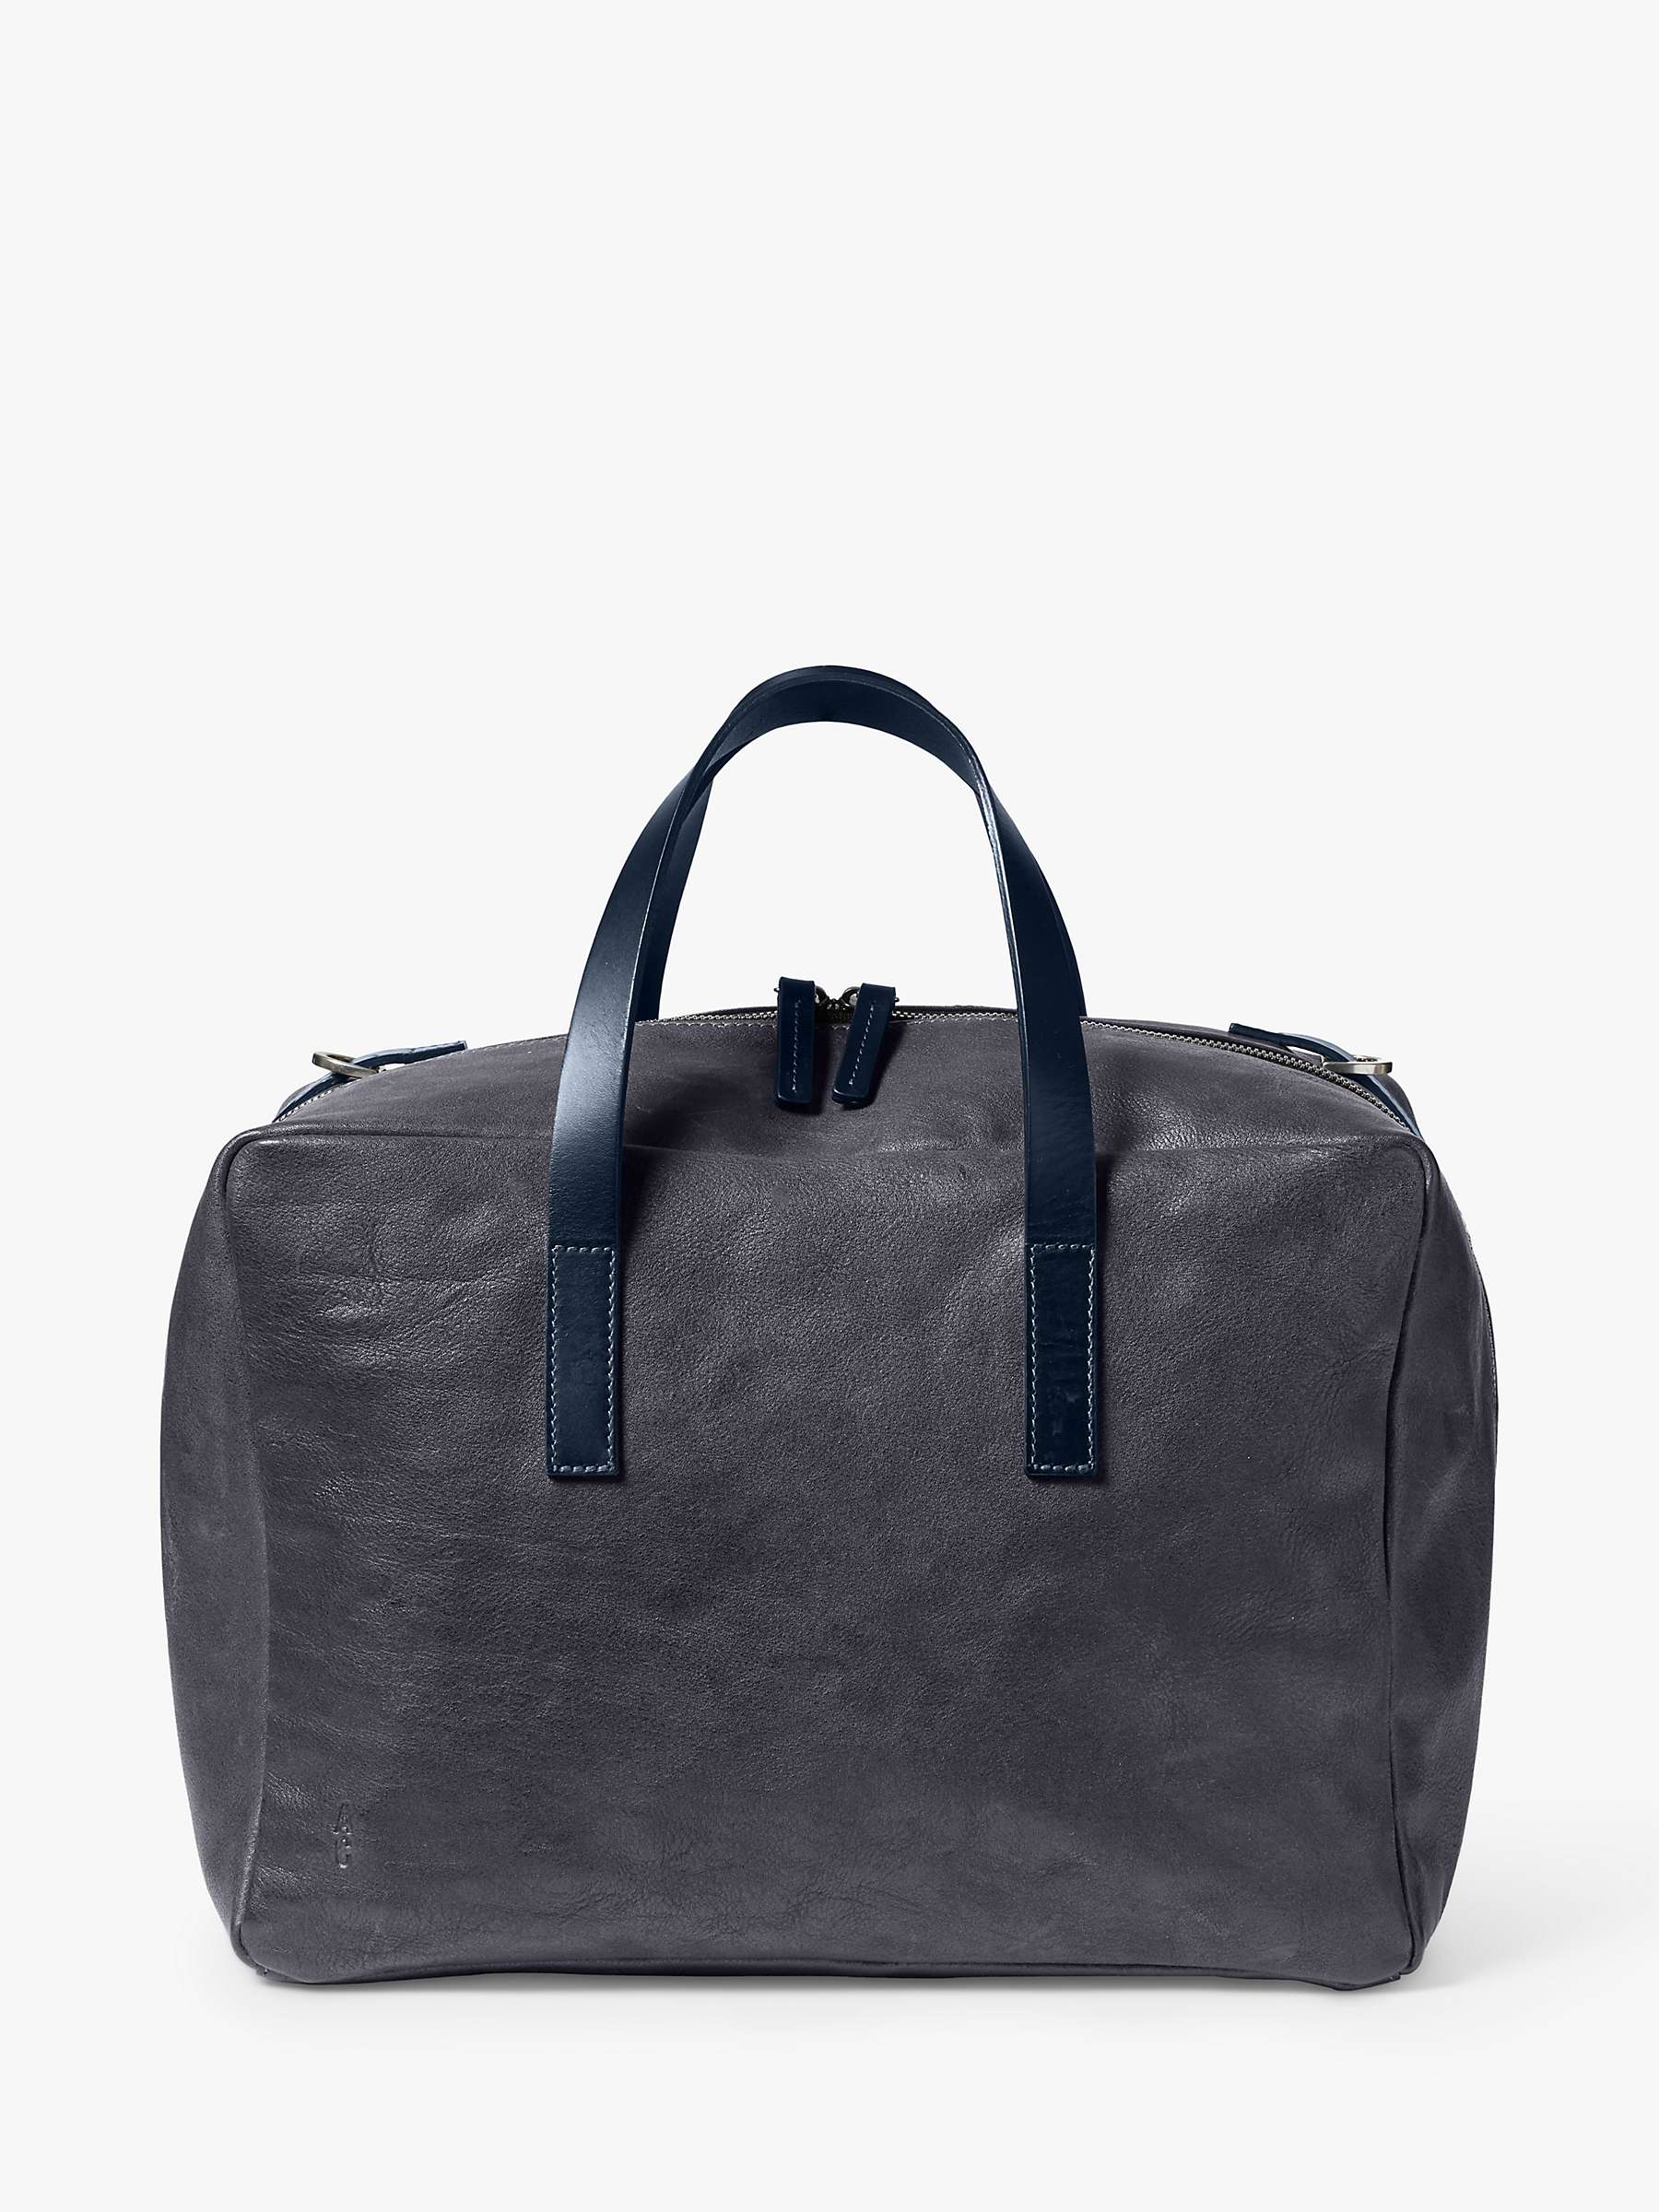 Buy Ally Capellino Jago Bowler Calvert Leather Bowling Bag Online at johnlewis.com